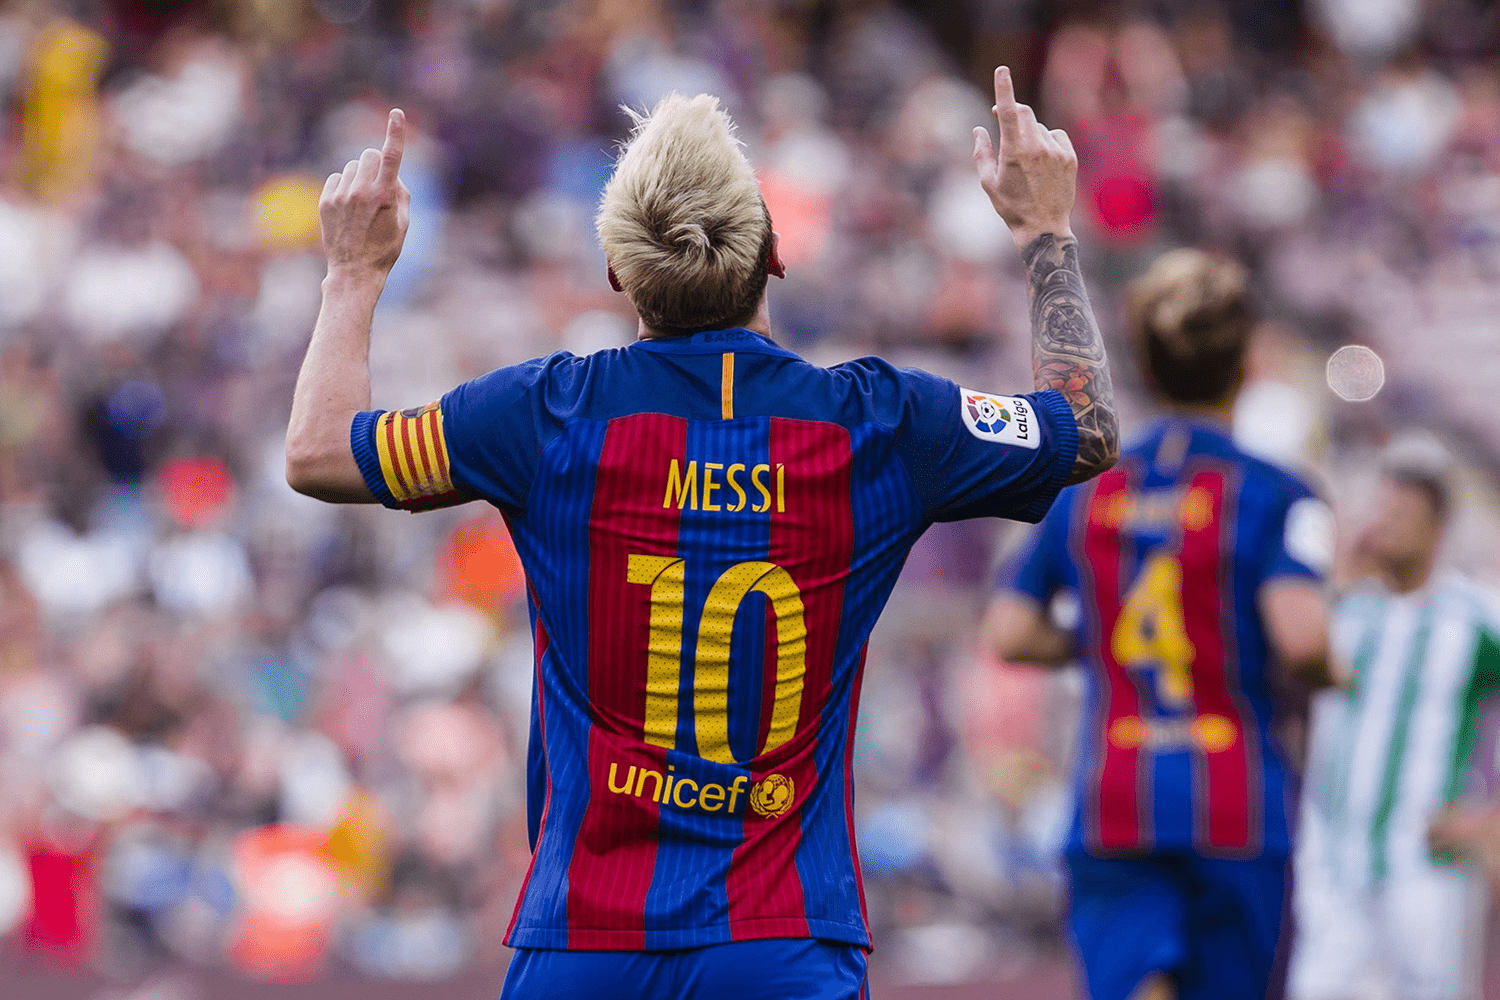 Messi Data Biography: 15 Seasons Now Complete and Available